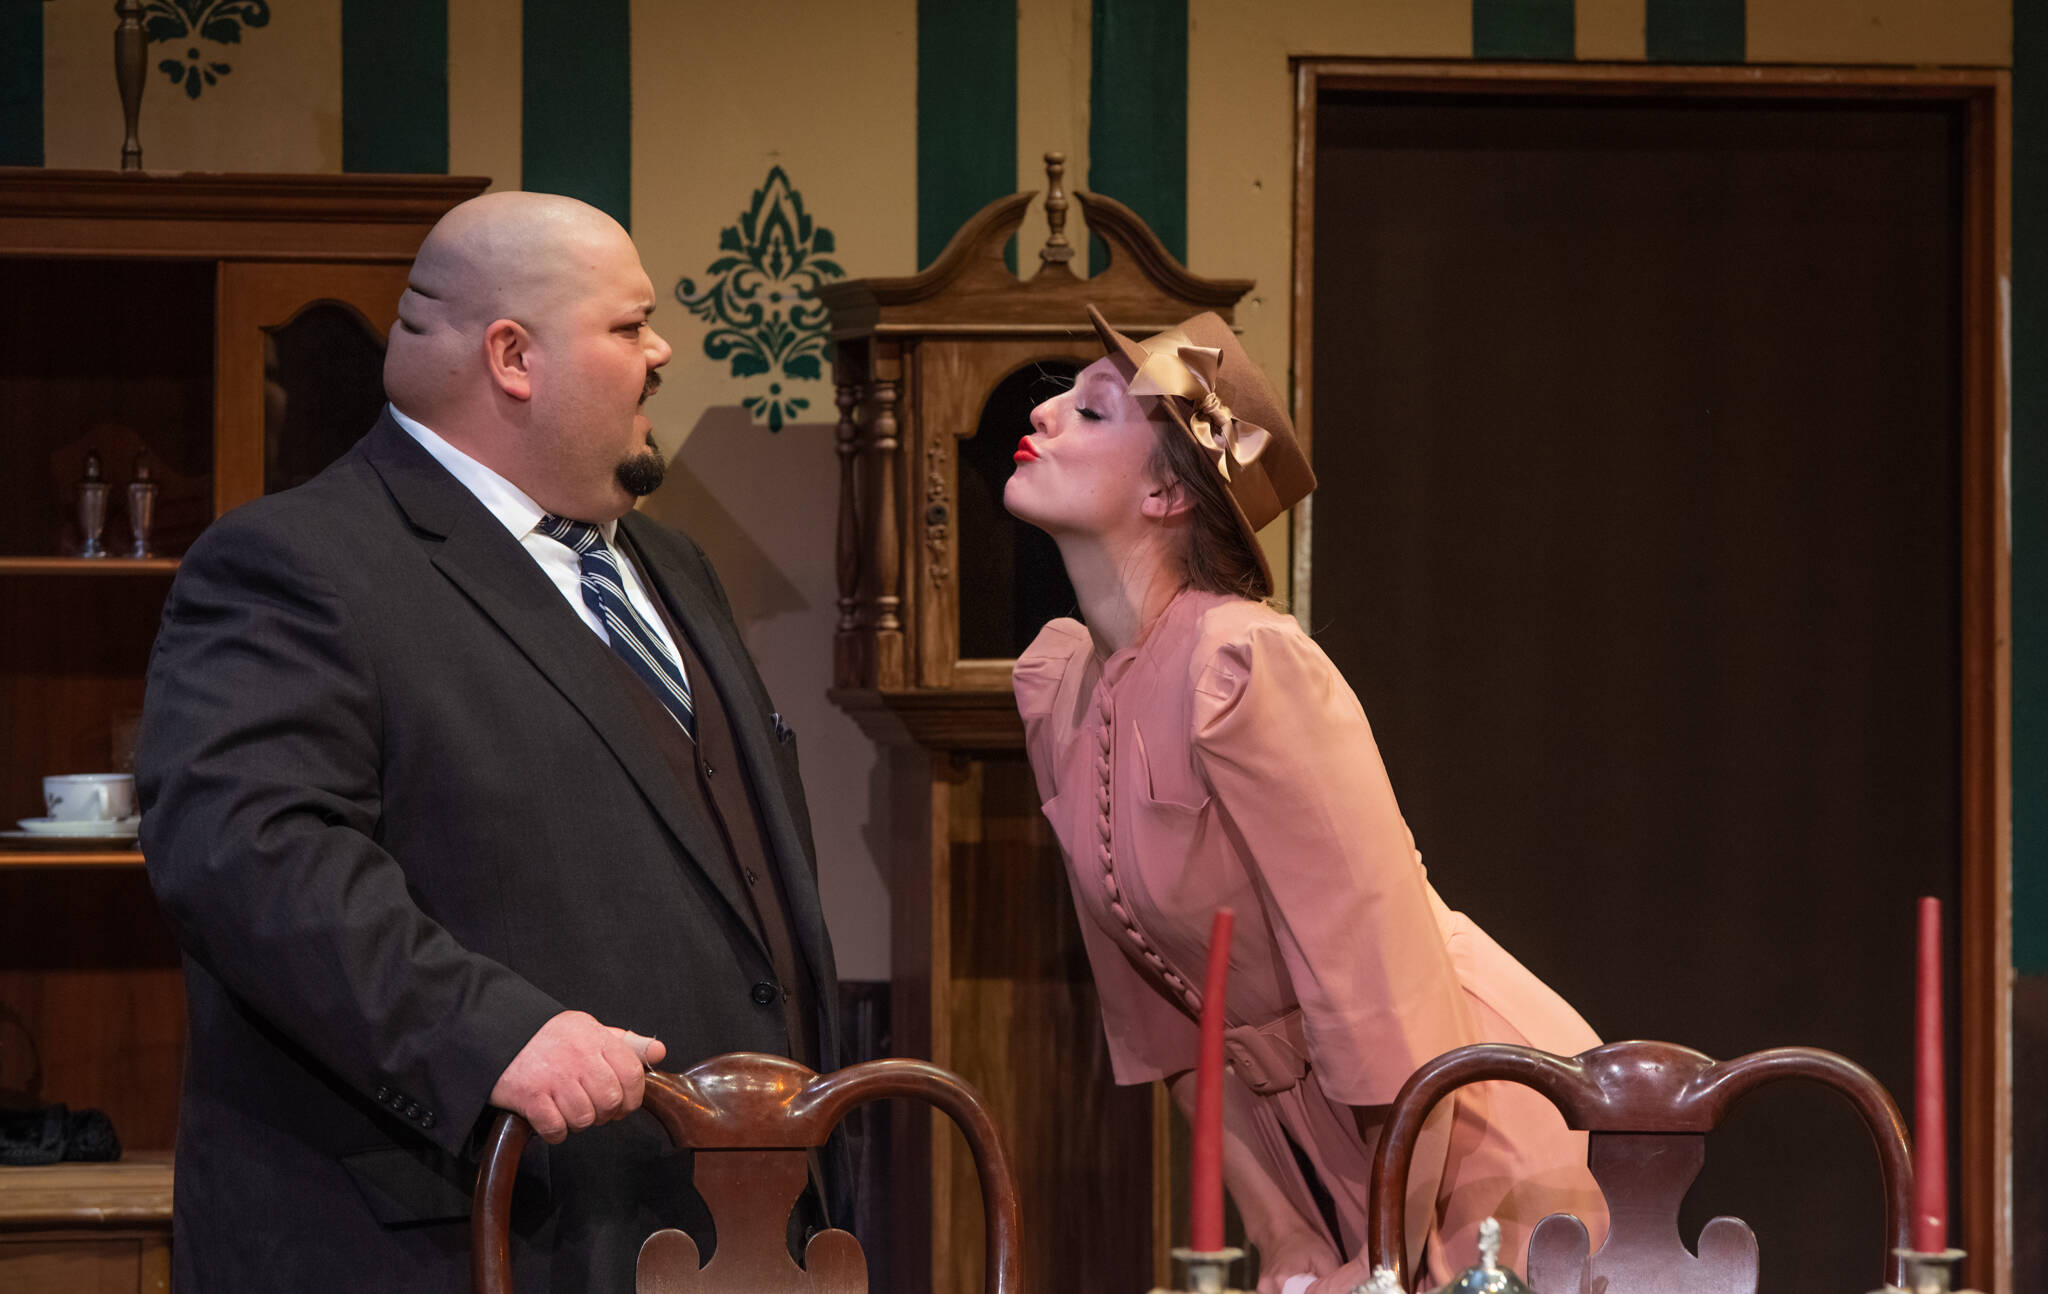 Arsenic and Old Lace' to begin three-weekend run